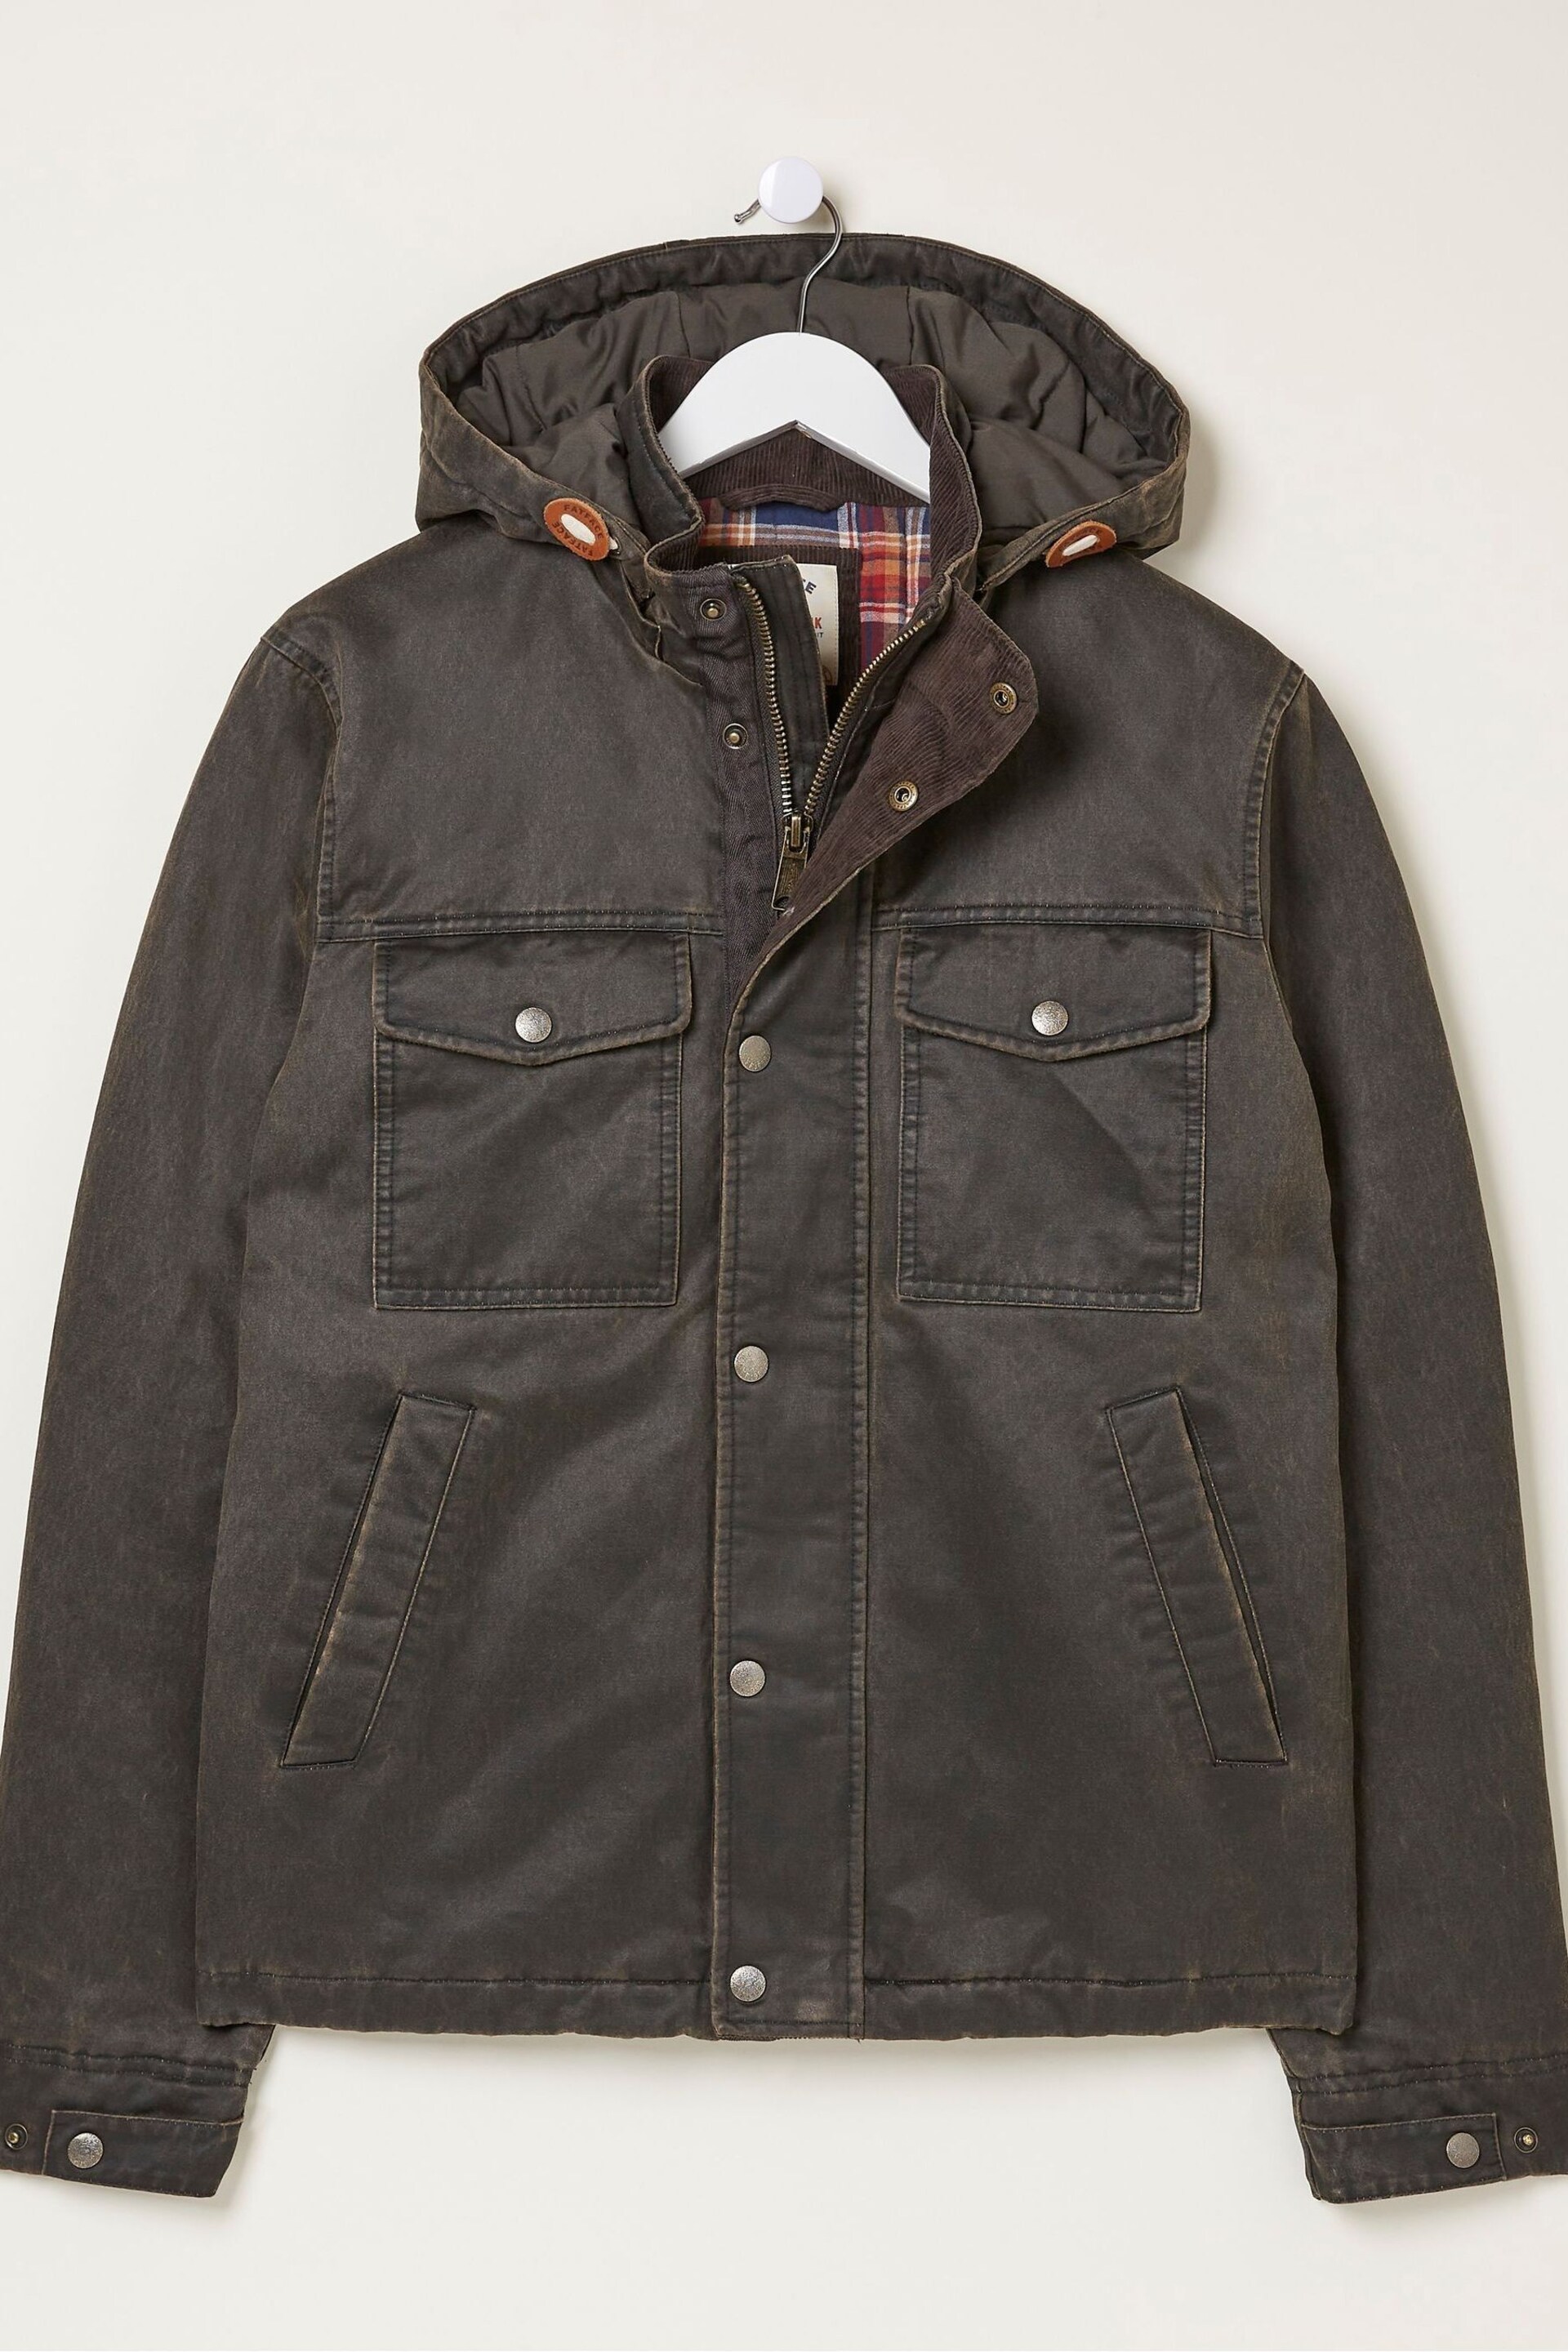 FatFace Brown Hooded Jacket - Image 6 of 6